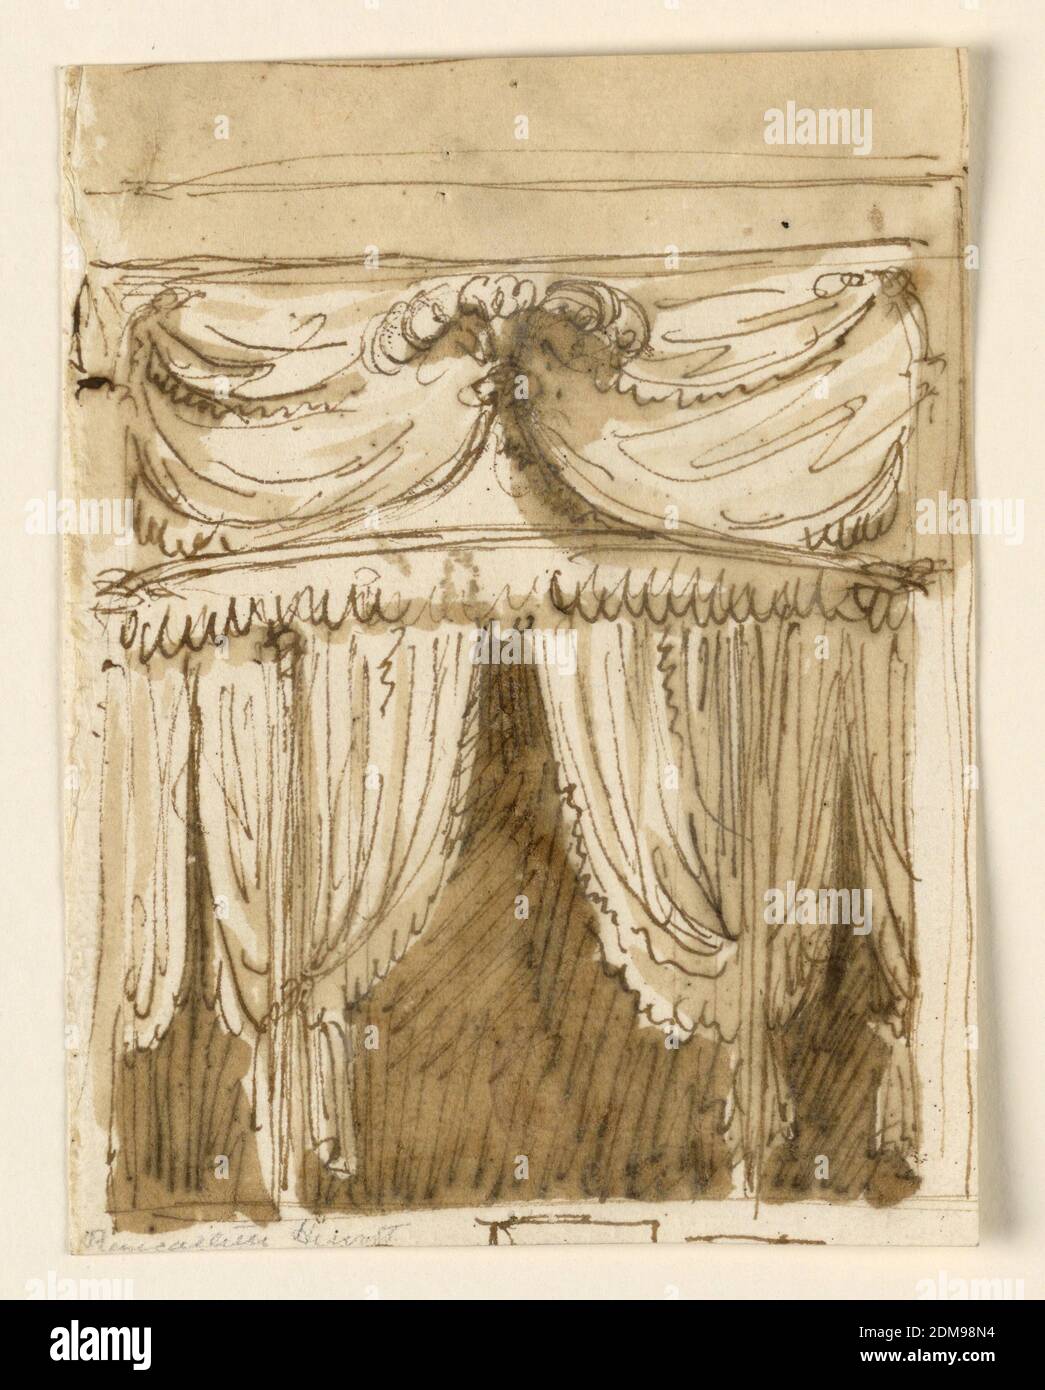 Project for a Tented Alcove. Tented alcove. The central portion is  circular. Two gatherings of drapery form and entryway. The roof is pointed,  with a cresting of feathers. The wall behind is